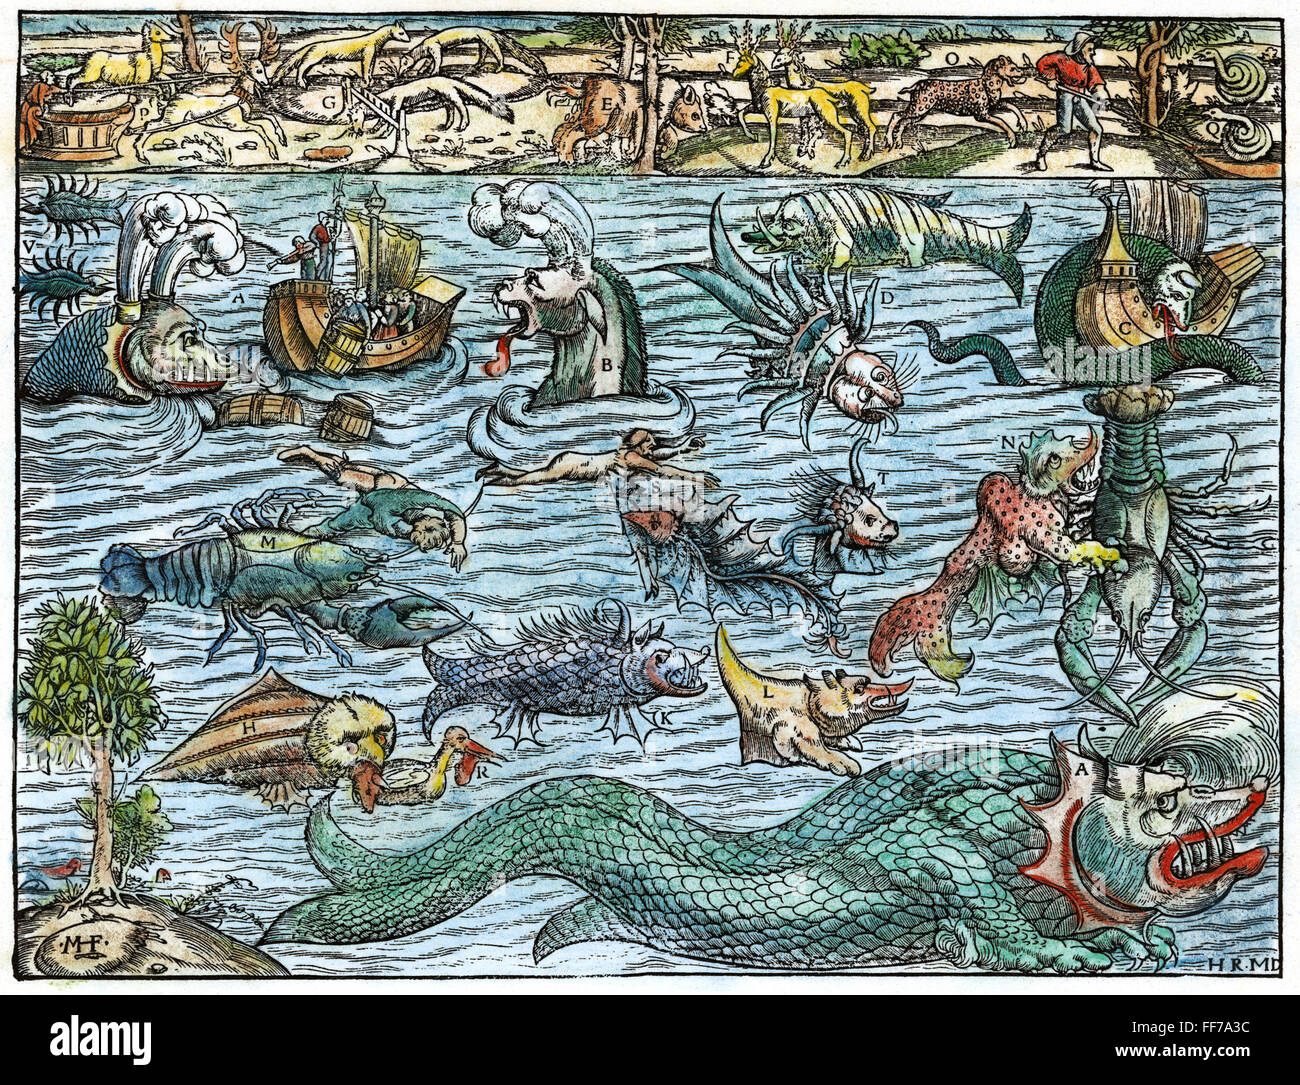 SEA MONSTERS, 1550. /nSea monsters inhabiting the north Atlantic and animals found in northern lands. Woodcut from Sebastian Mⁿnster's 'Cosmographia,' Basle, 1550. Stock Photo